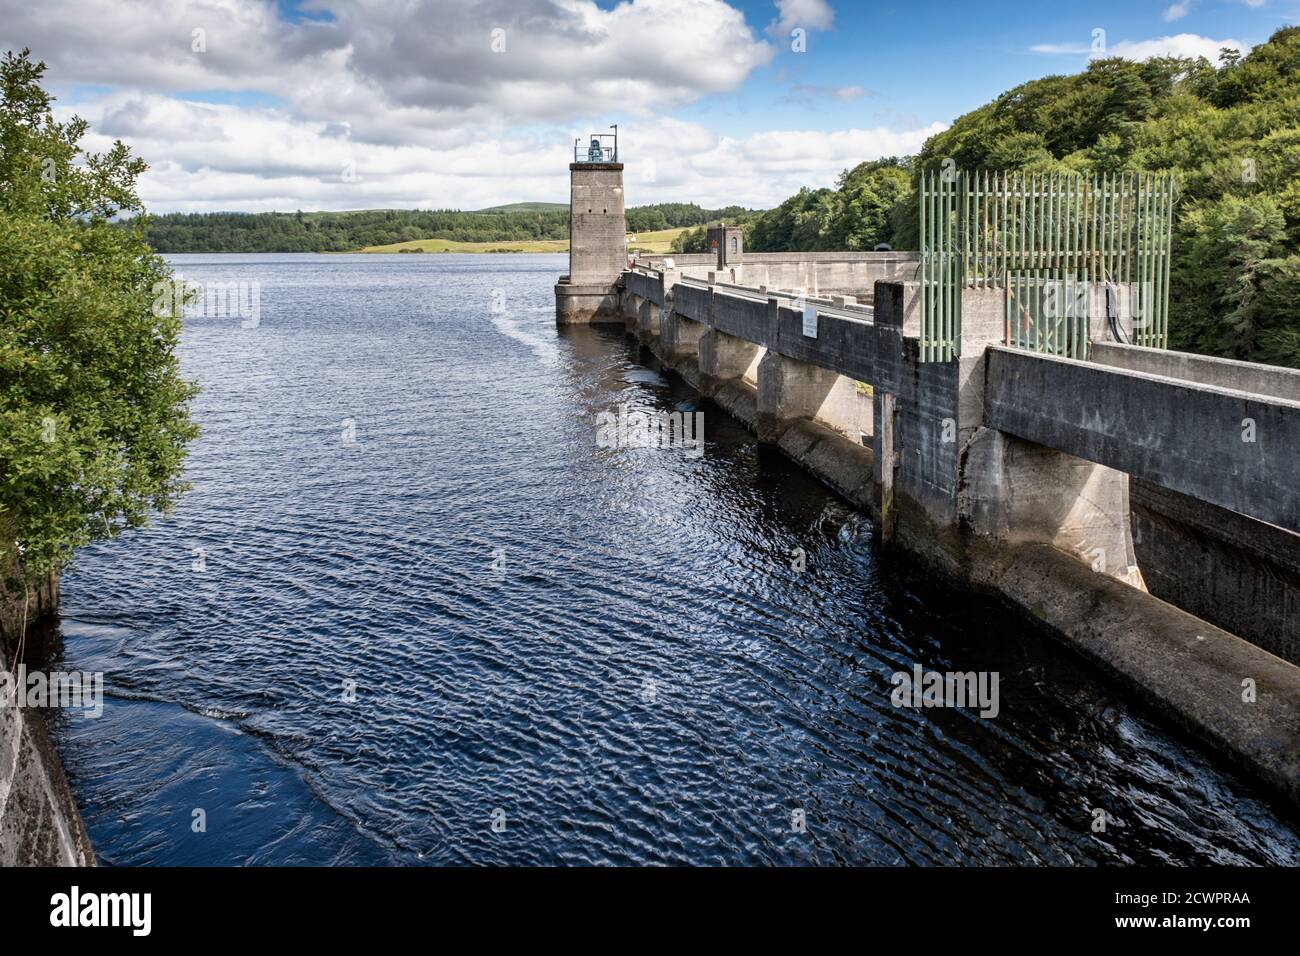 Earlstoun Dam Built by the Galloway Water Power Co in the 1930's, Earlstoun Loch, Dumfries and Galloway, Scotland Stock Photo